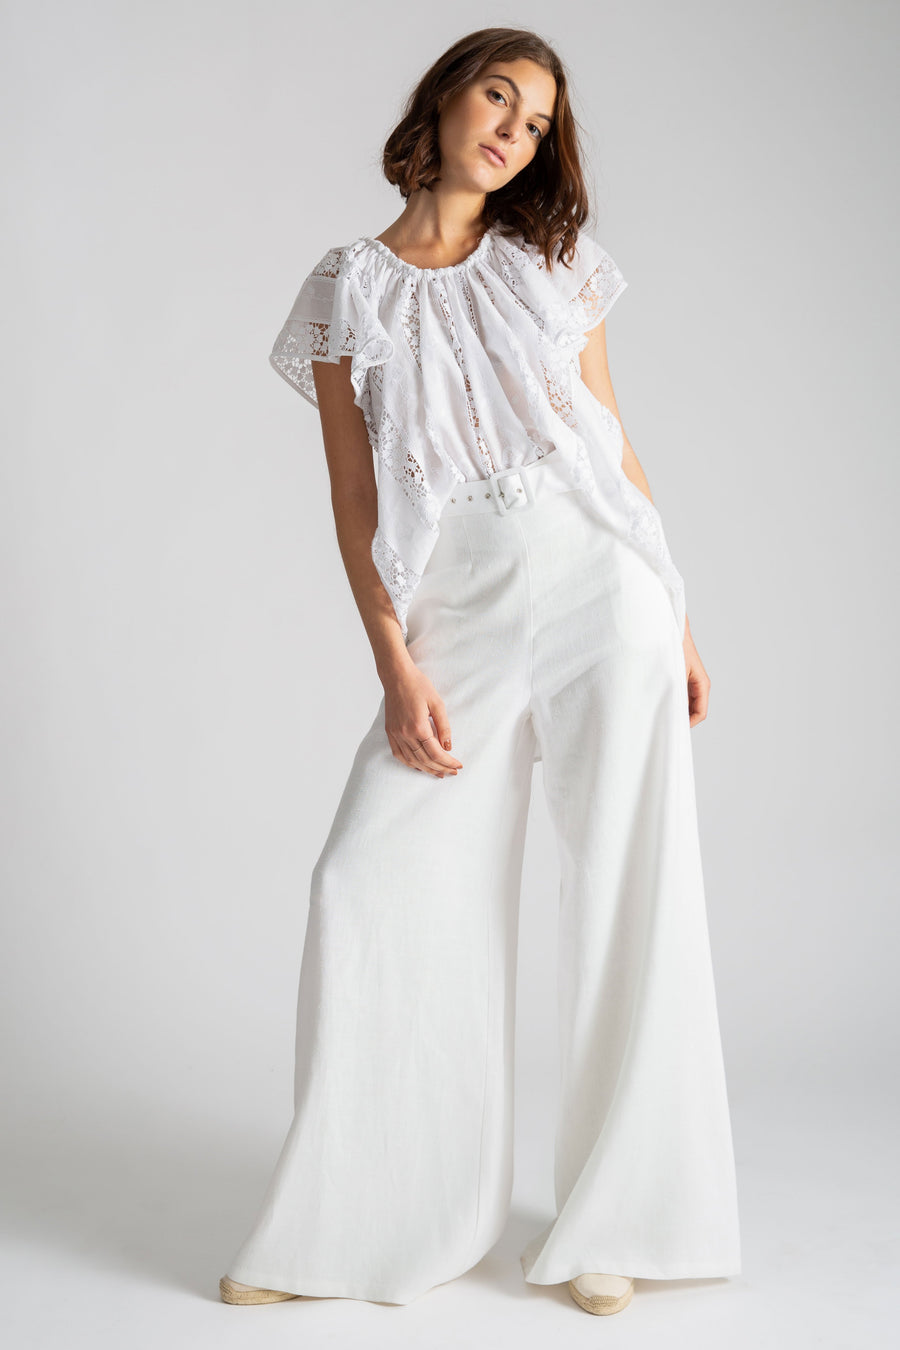 This is a photo of a woman wearing an all white outfit with linen white high waisted flare pants and belt. On top, she wears a high-low top with flowy show sleeves in a cotton lace embroidery.